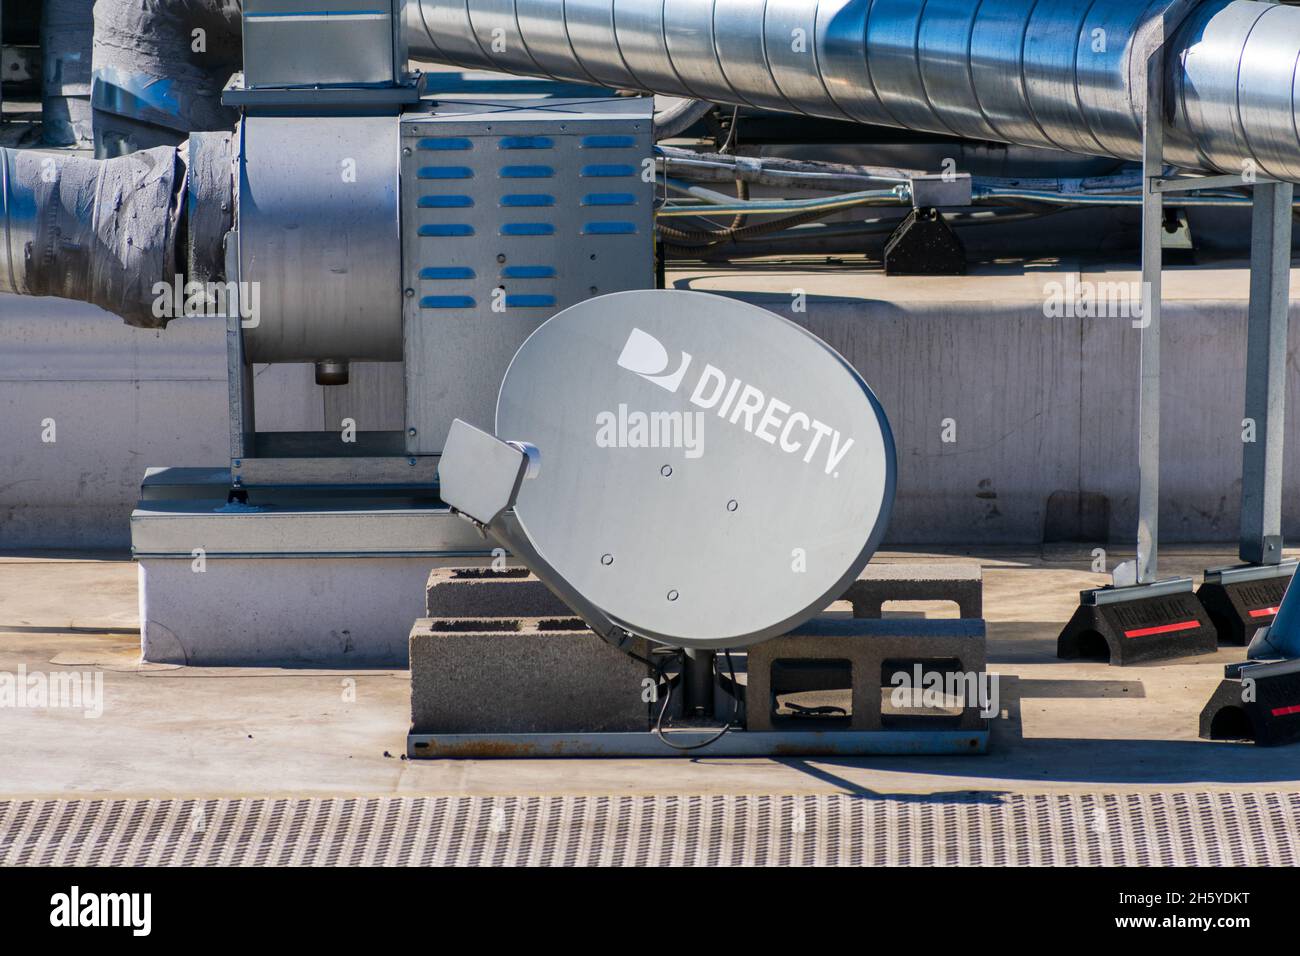 DirecTV satellite dish antenna with a multi-satellite LNB installed on the building roof. DirecTV is an American direct broadcast satellite service pr Stock Photo